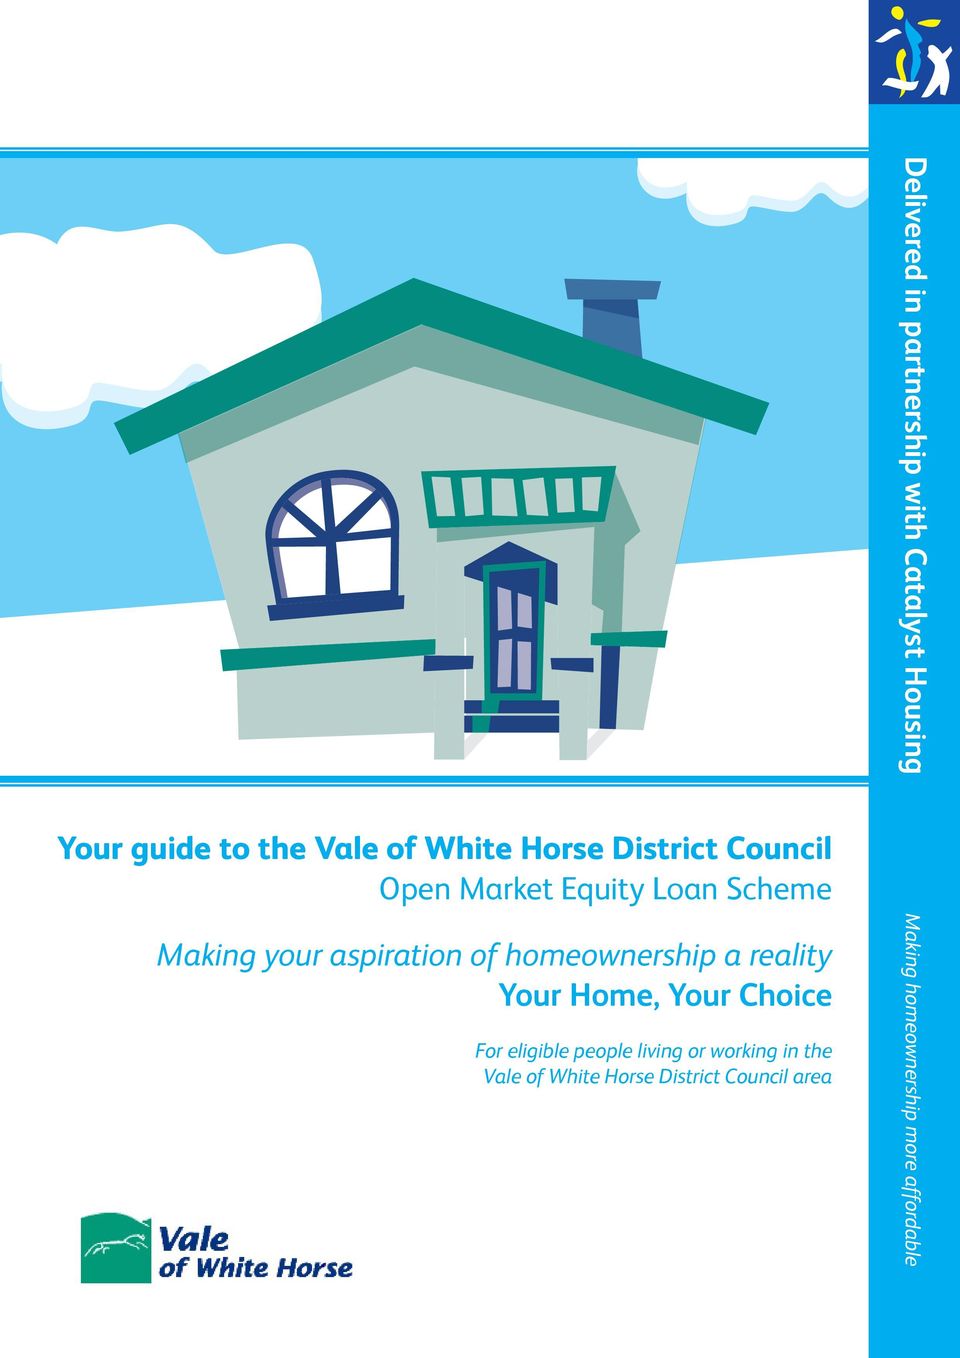 For eligible people living or working in the Vale of White Horse District Council